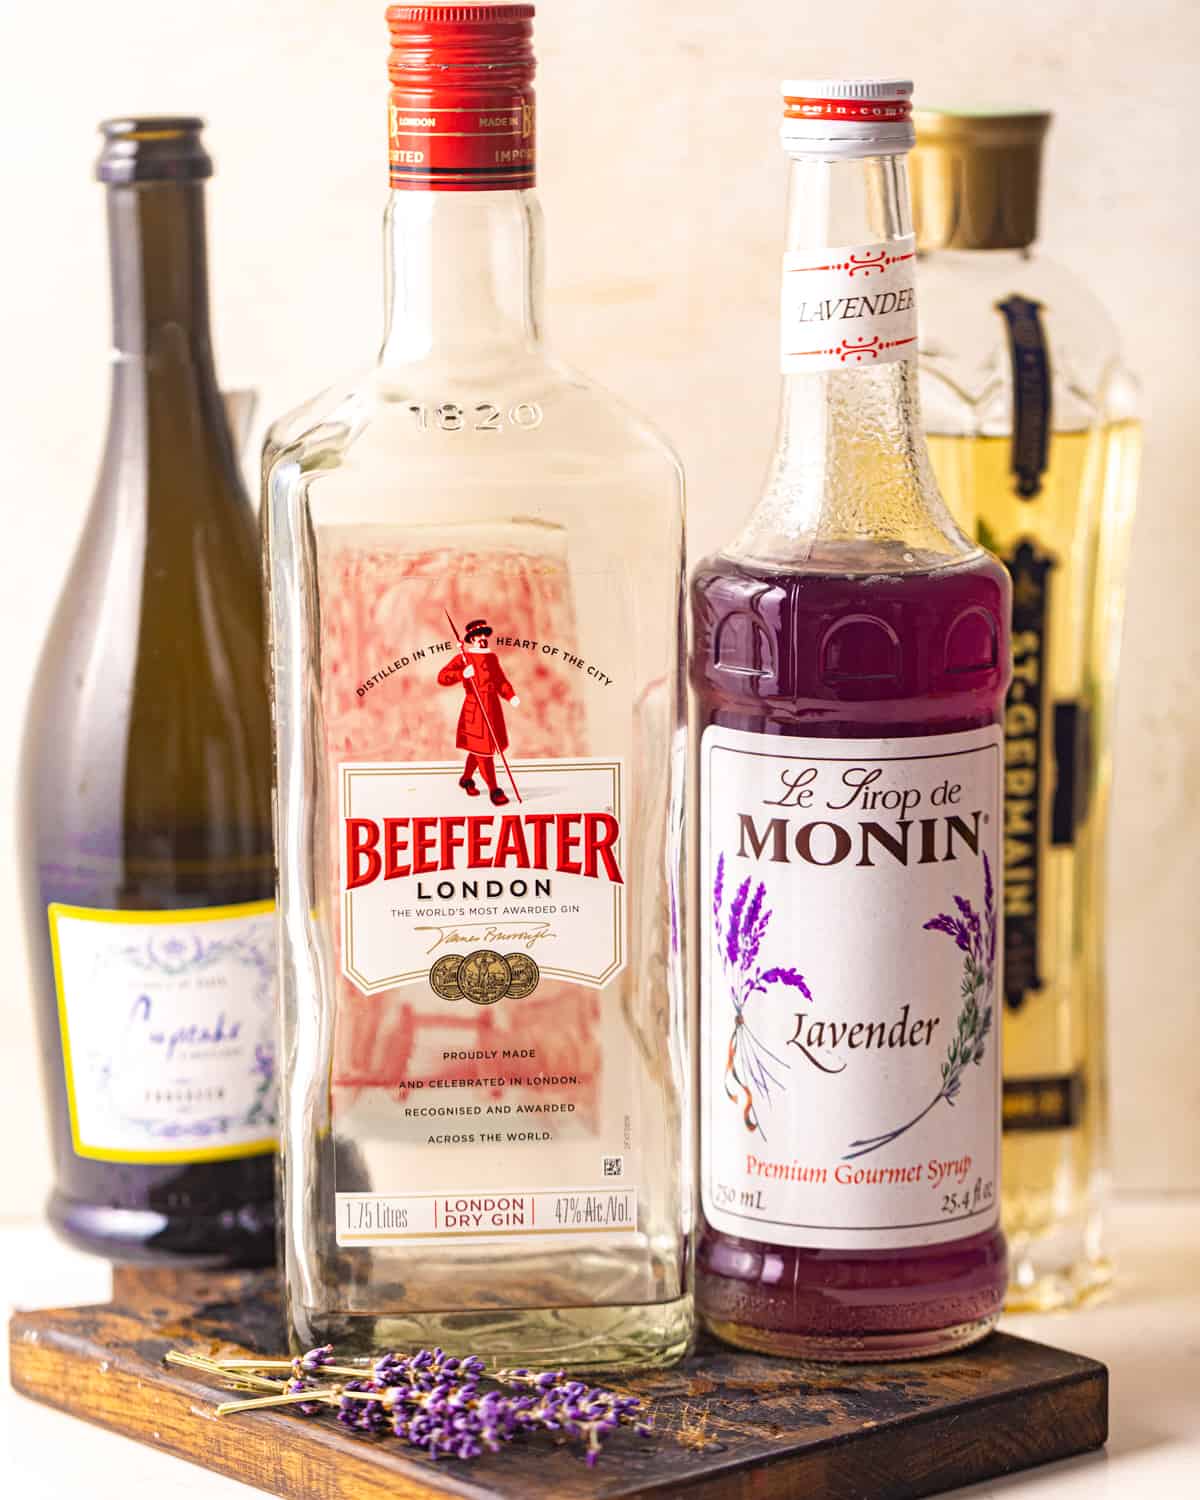 ingredients to make a lavender cocktail - gin, lavender syrup, prosecco, elderflower liqueur, and lime juice.